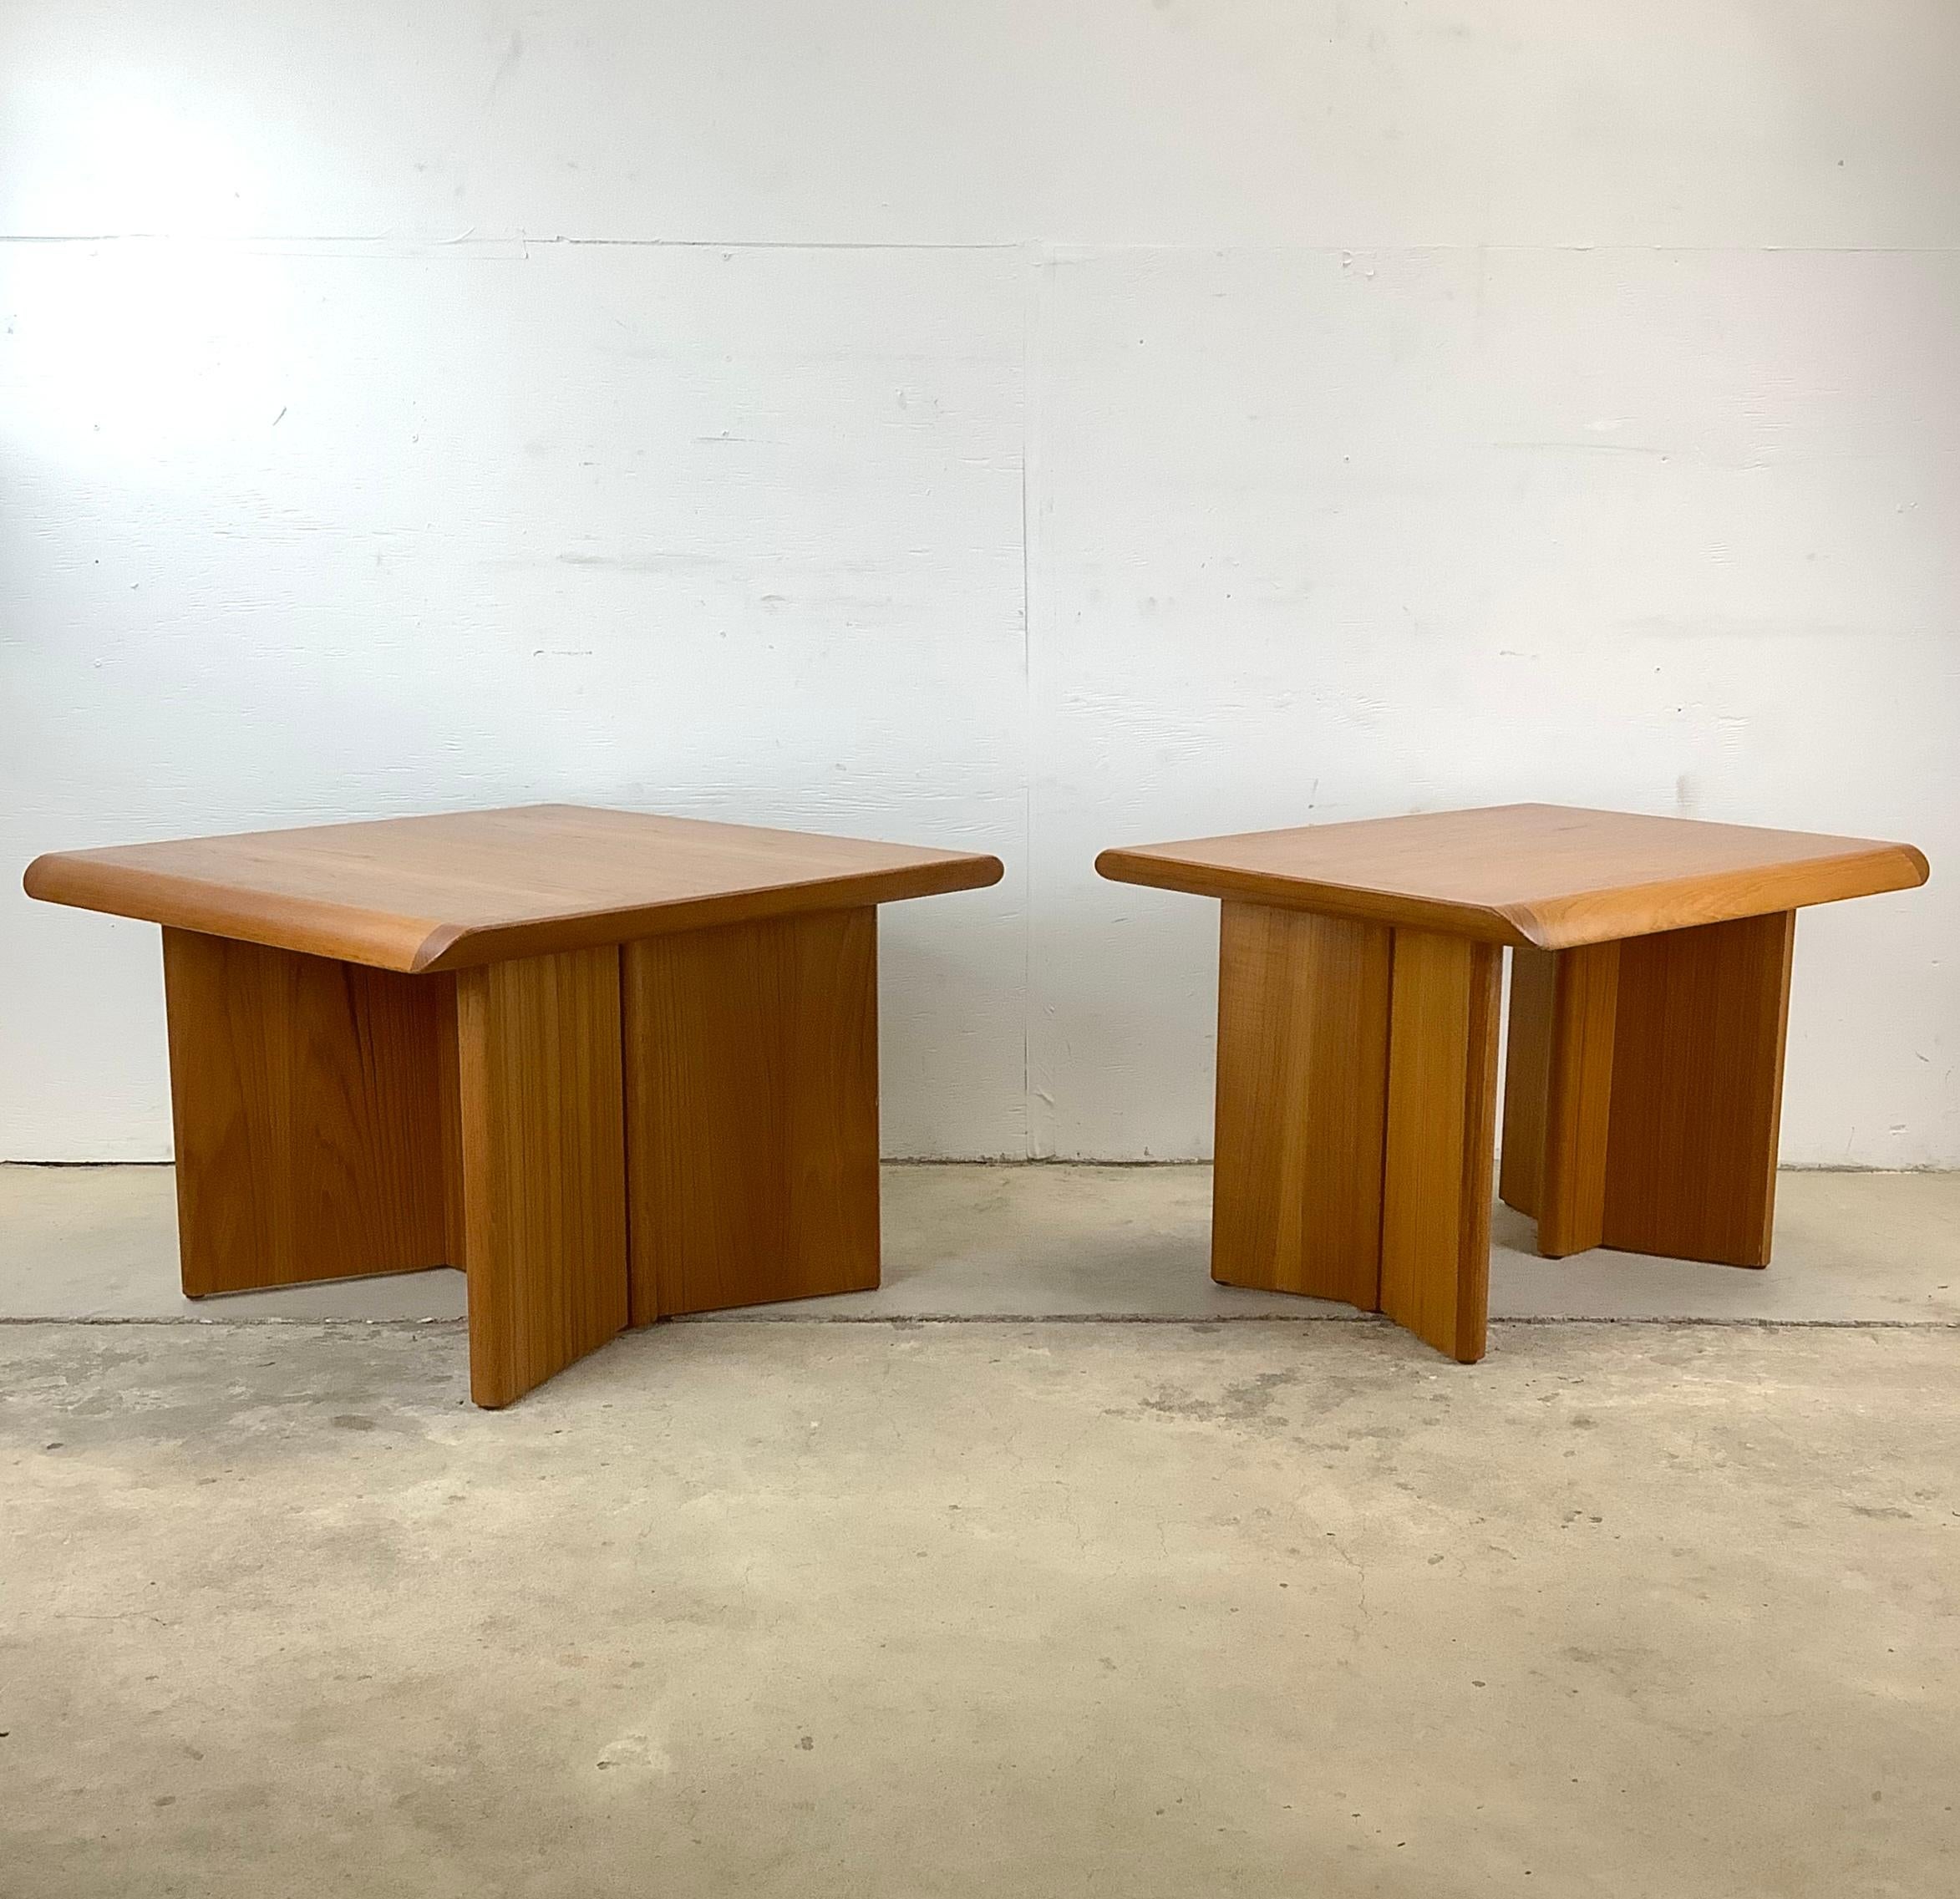 Introducing this charming pair of Vintage Modern Teak End Tables by Nordic Furniture – a delightful combination of Scandinavian style, functionality, and sustainability. Crafted with quality teak finish, these end tables boast the warm tones and